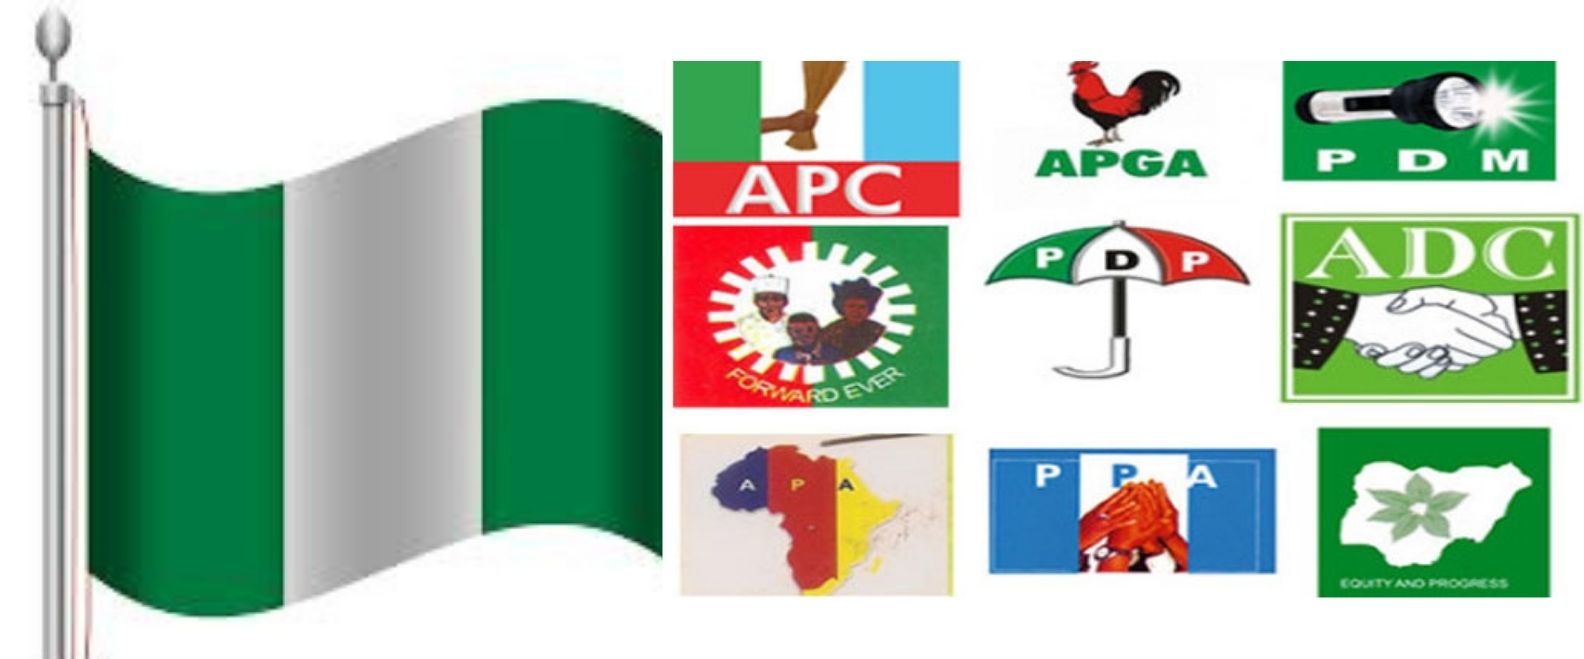 Wither Nigerian Democracy: Urgency Of Rebuilding Political Parties